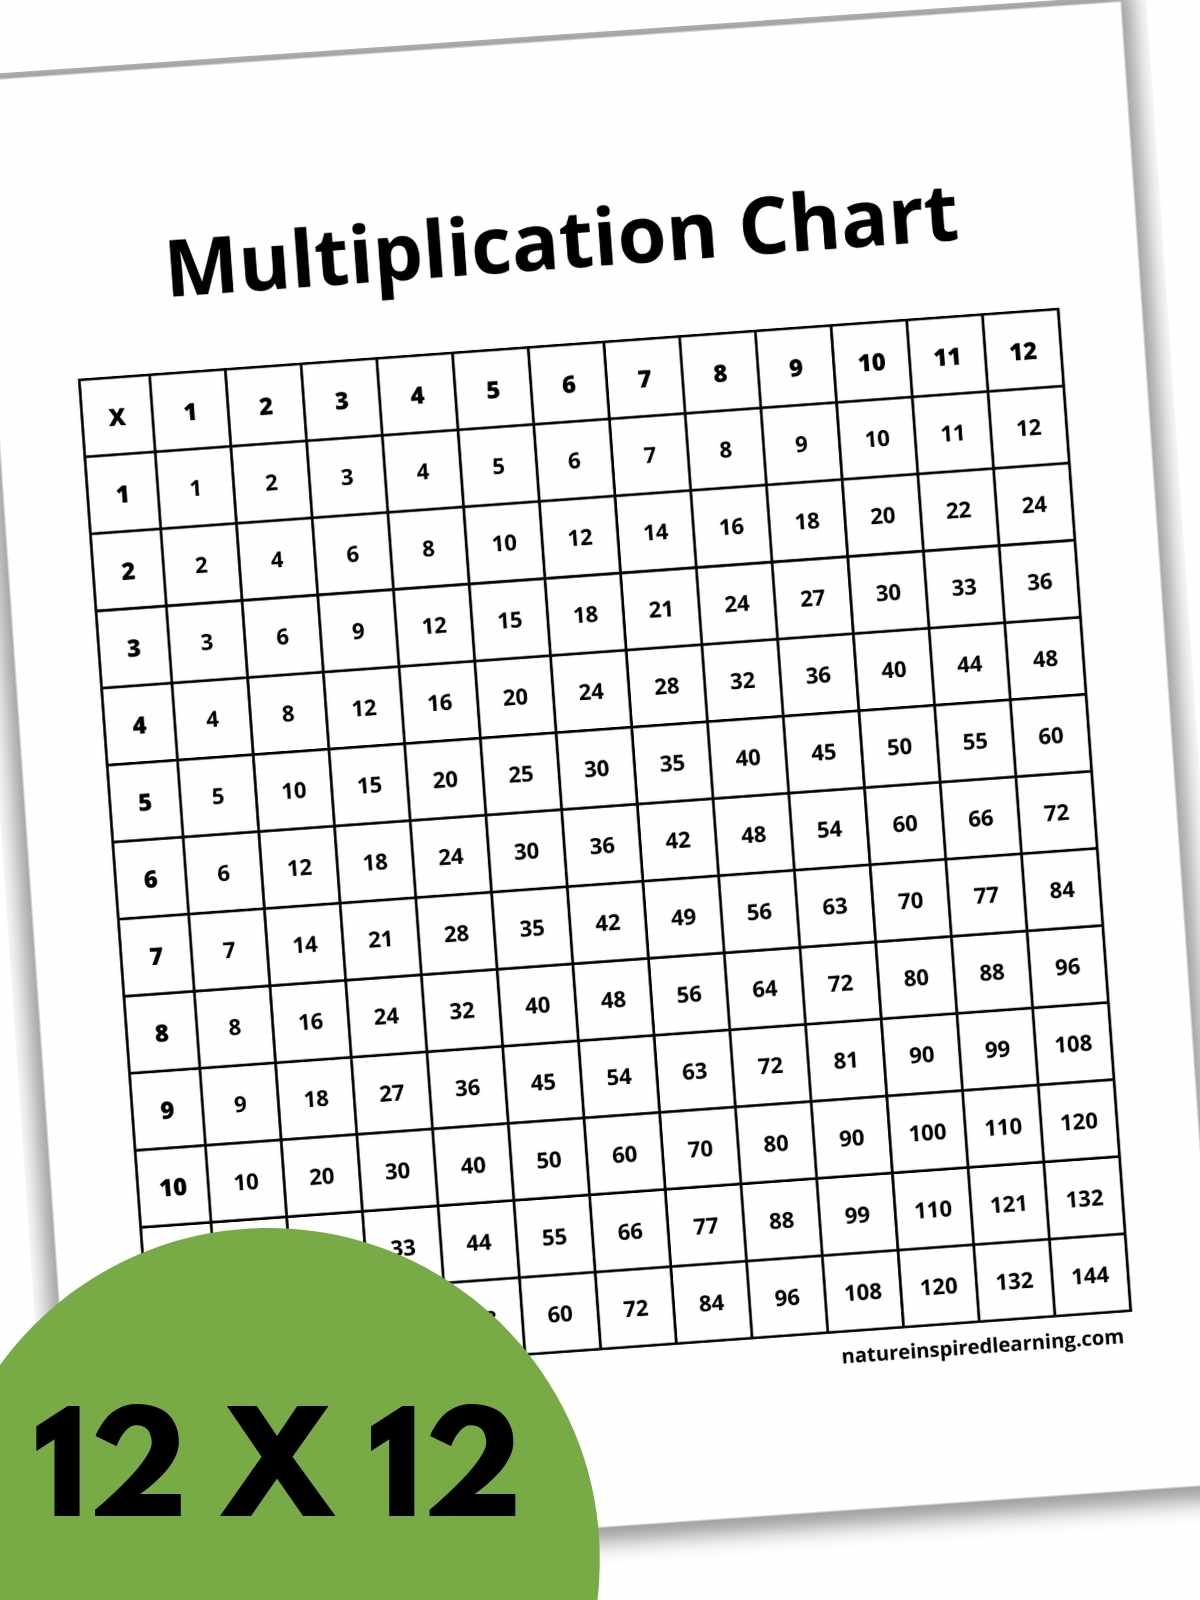 Black and white multiplication chart with basic label across top. All white boxes with black numbers and black outlines. Green half circle with text overlay bottom left corner.